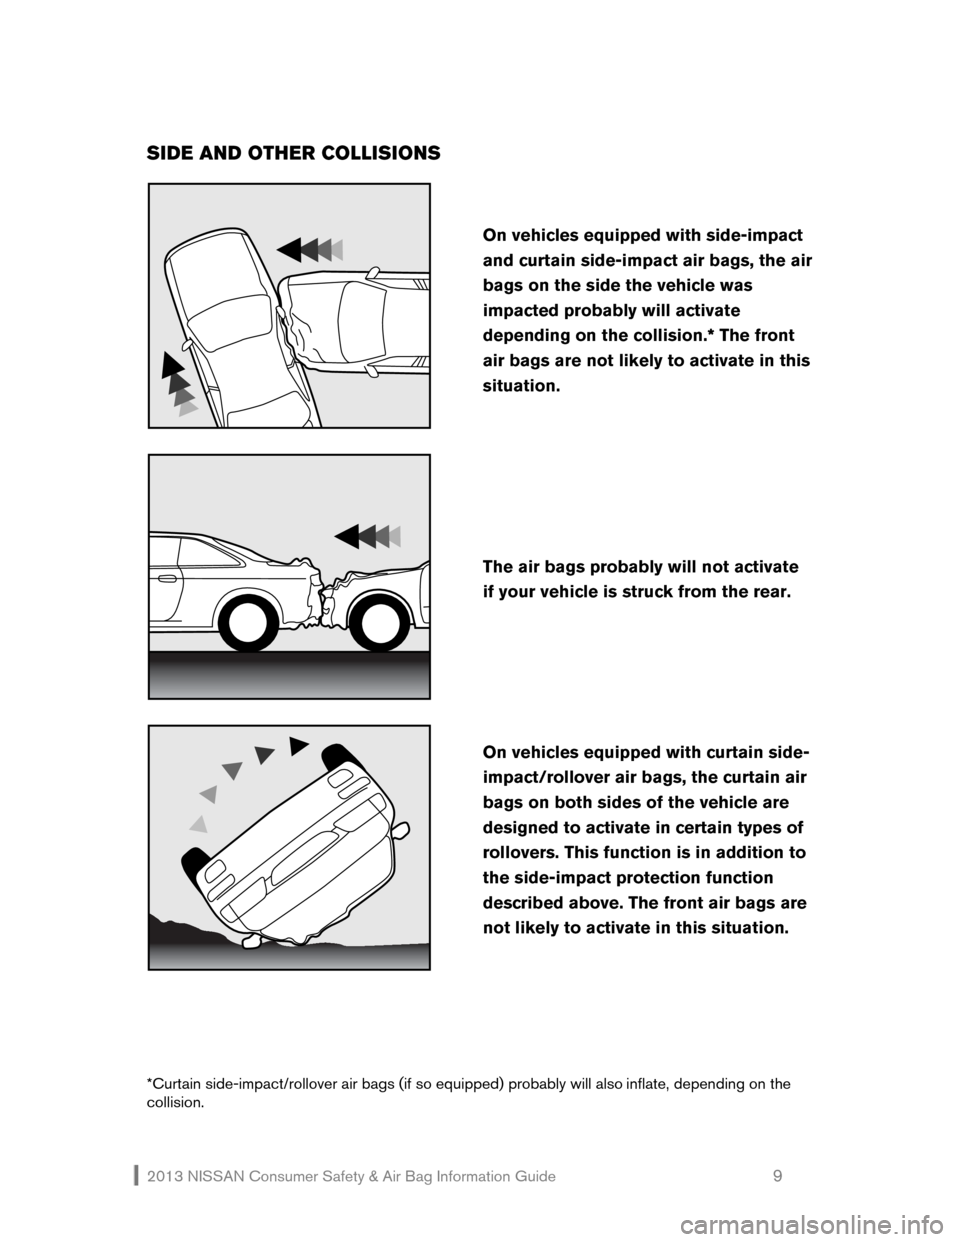 NISSAN GT-R 2013 R35 Consumer Safety Air Bag Information Guide 2013 NISSAN Consumer Safety & Air Bag Information Guide                                                   9 
SIDE AND OTHER COLLISIONS 
 
 
 
 
 
*Curtain side-impact/rollover air bags (if so equipped